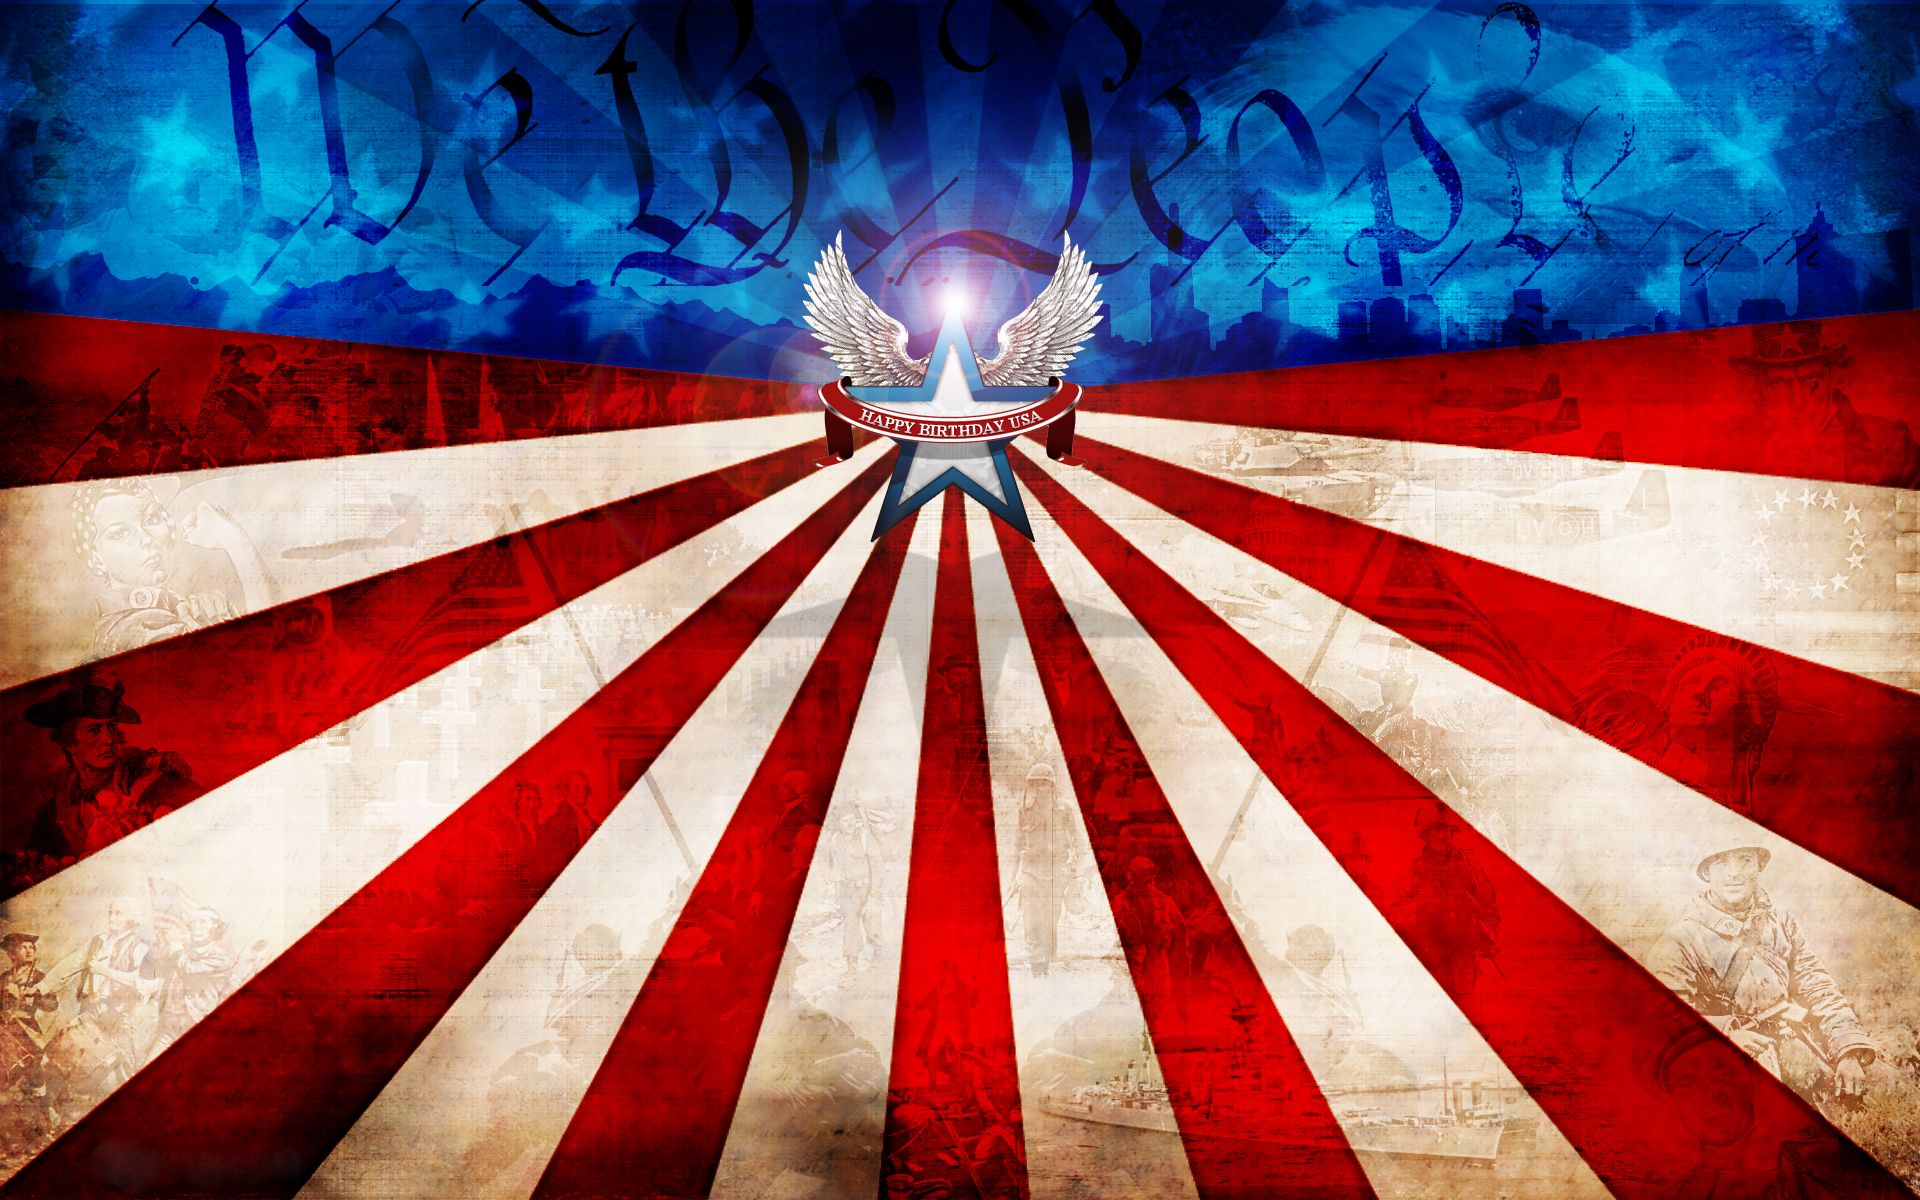 Happy 4TH OF July of July Wallpaper